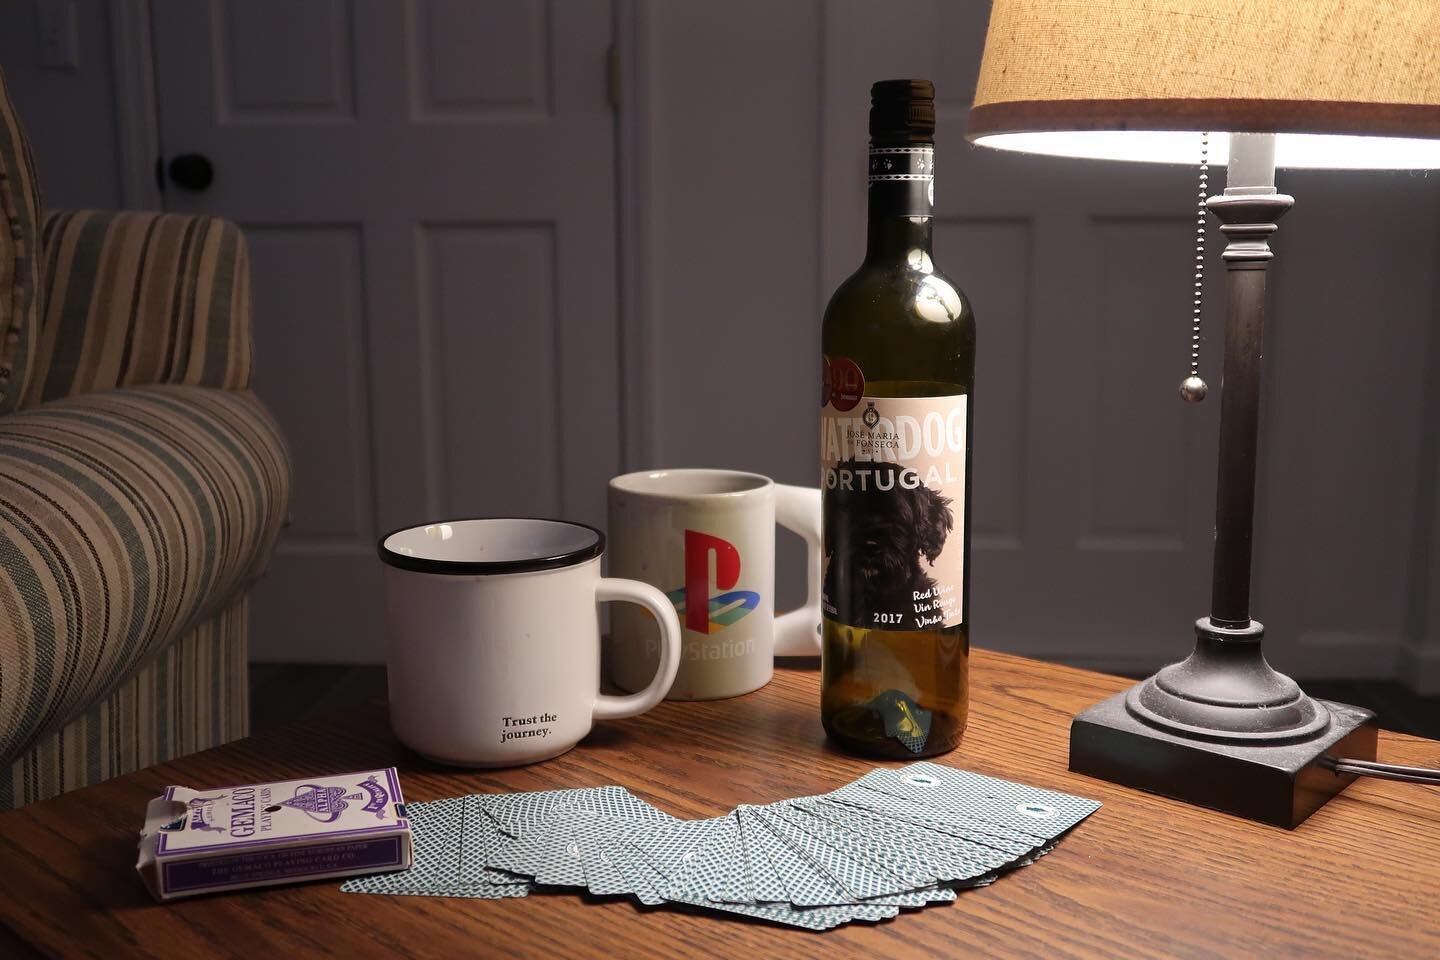 Desperate times call for desperate measures&hellip; #mugwine 
.
Card games, wine, but no wine glasses means getting out the coffee mugs and repurposing them 😄
.
#winewednesday #redwine #wineandcards #wineloversclub #winestories🍷